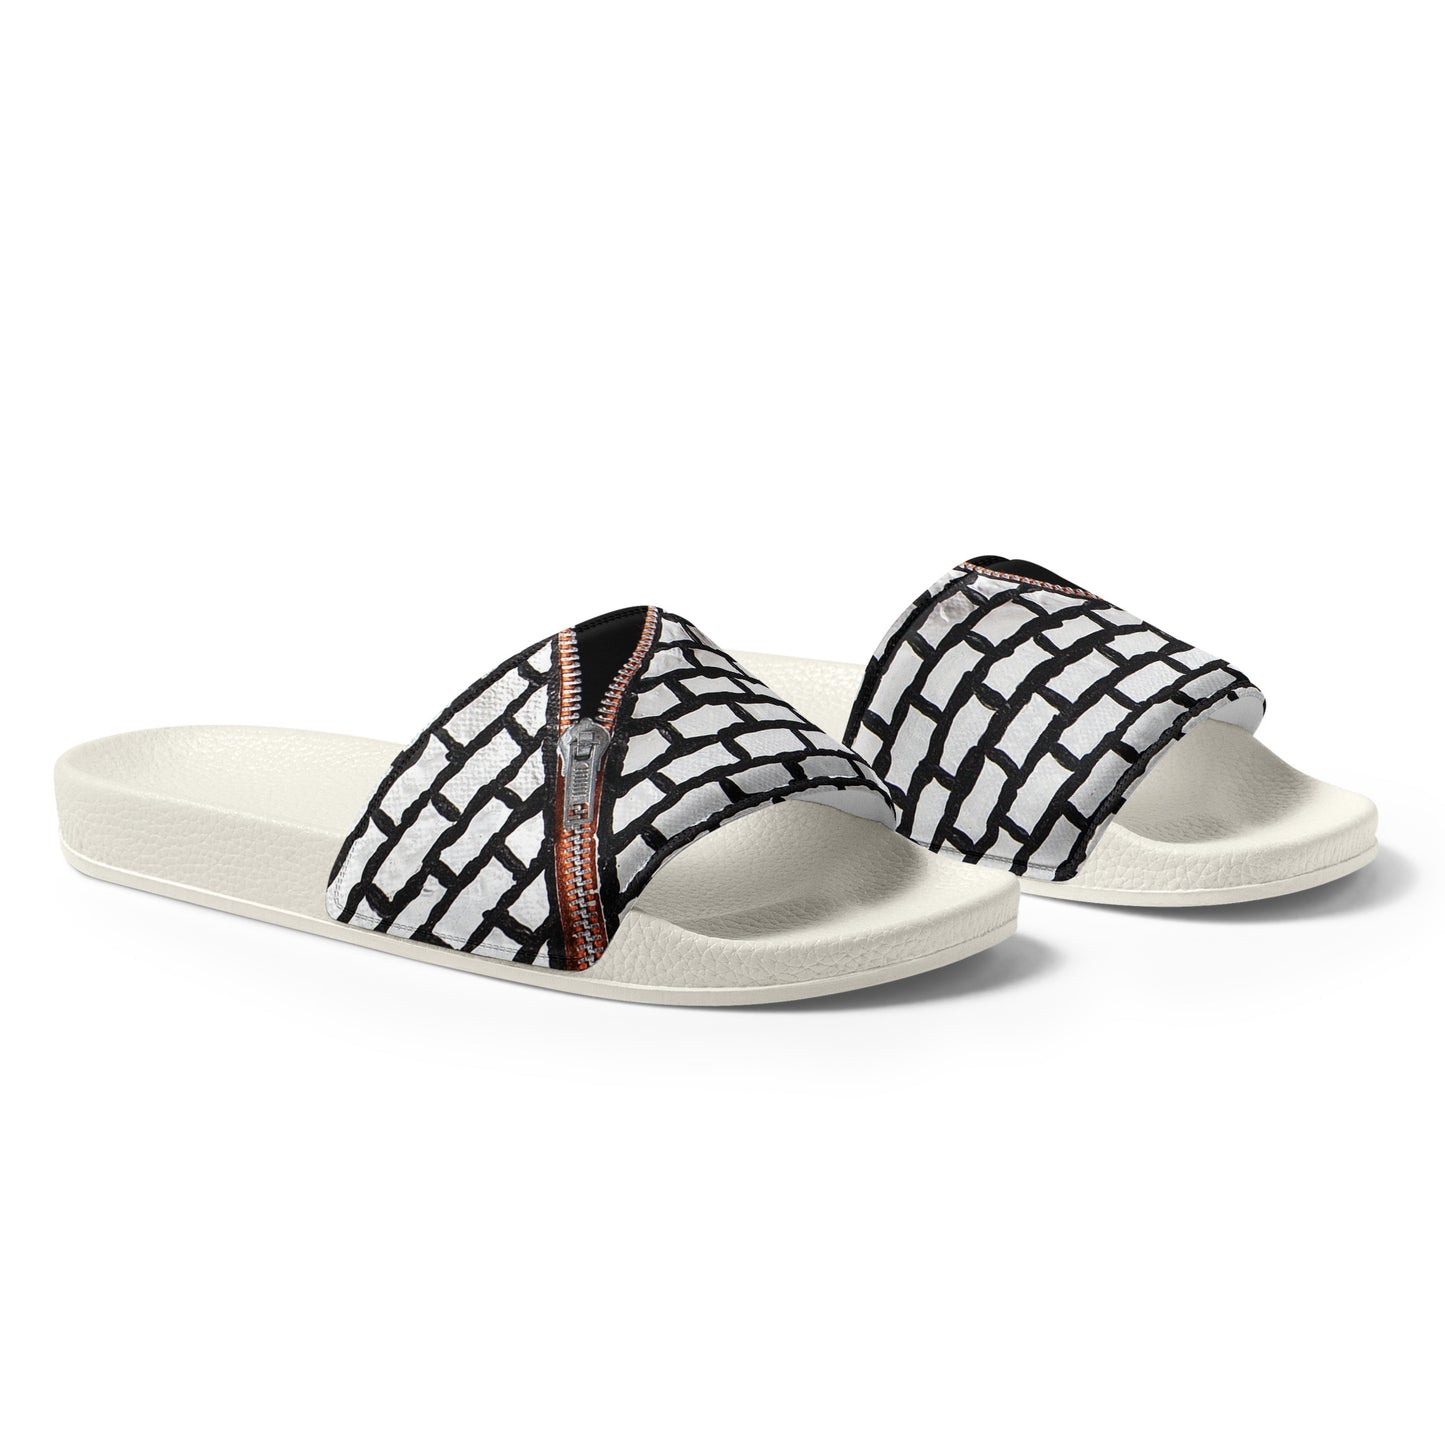 Men's sandals - Fly Wall